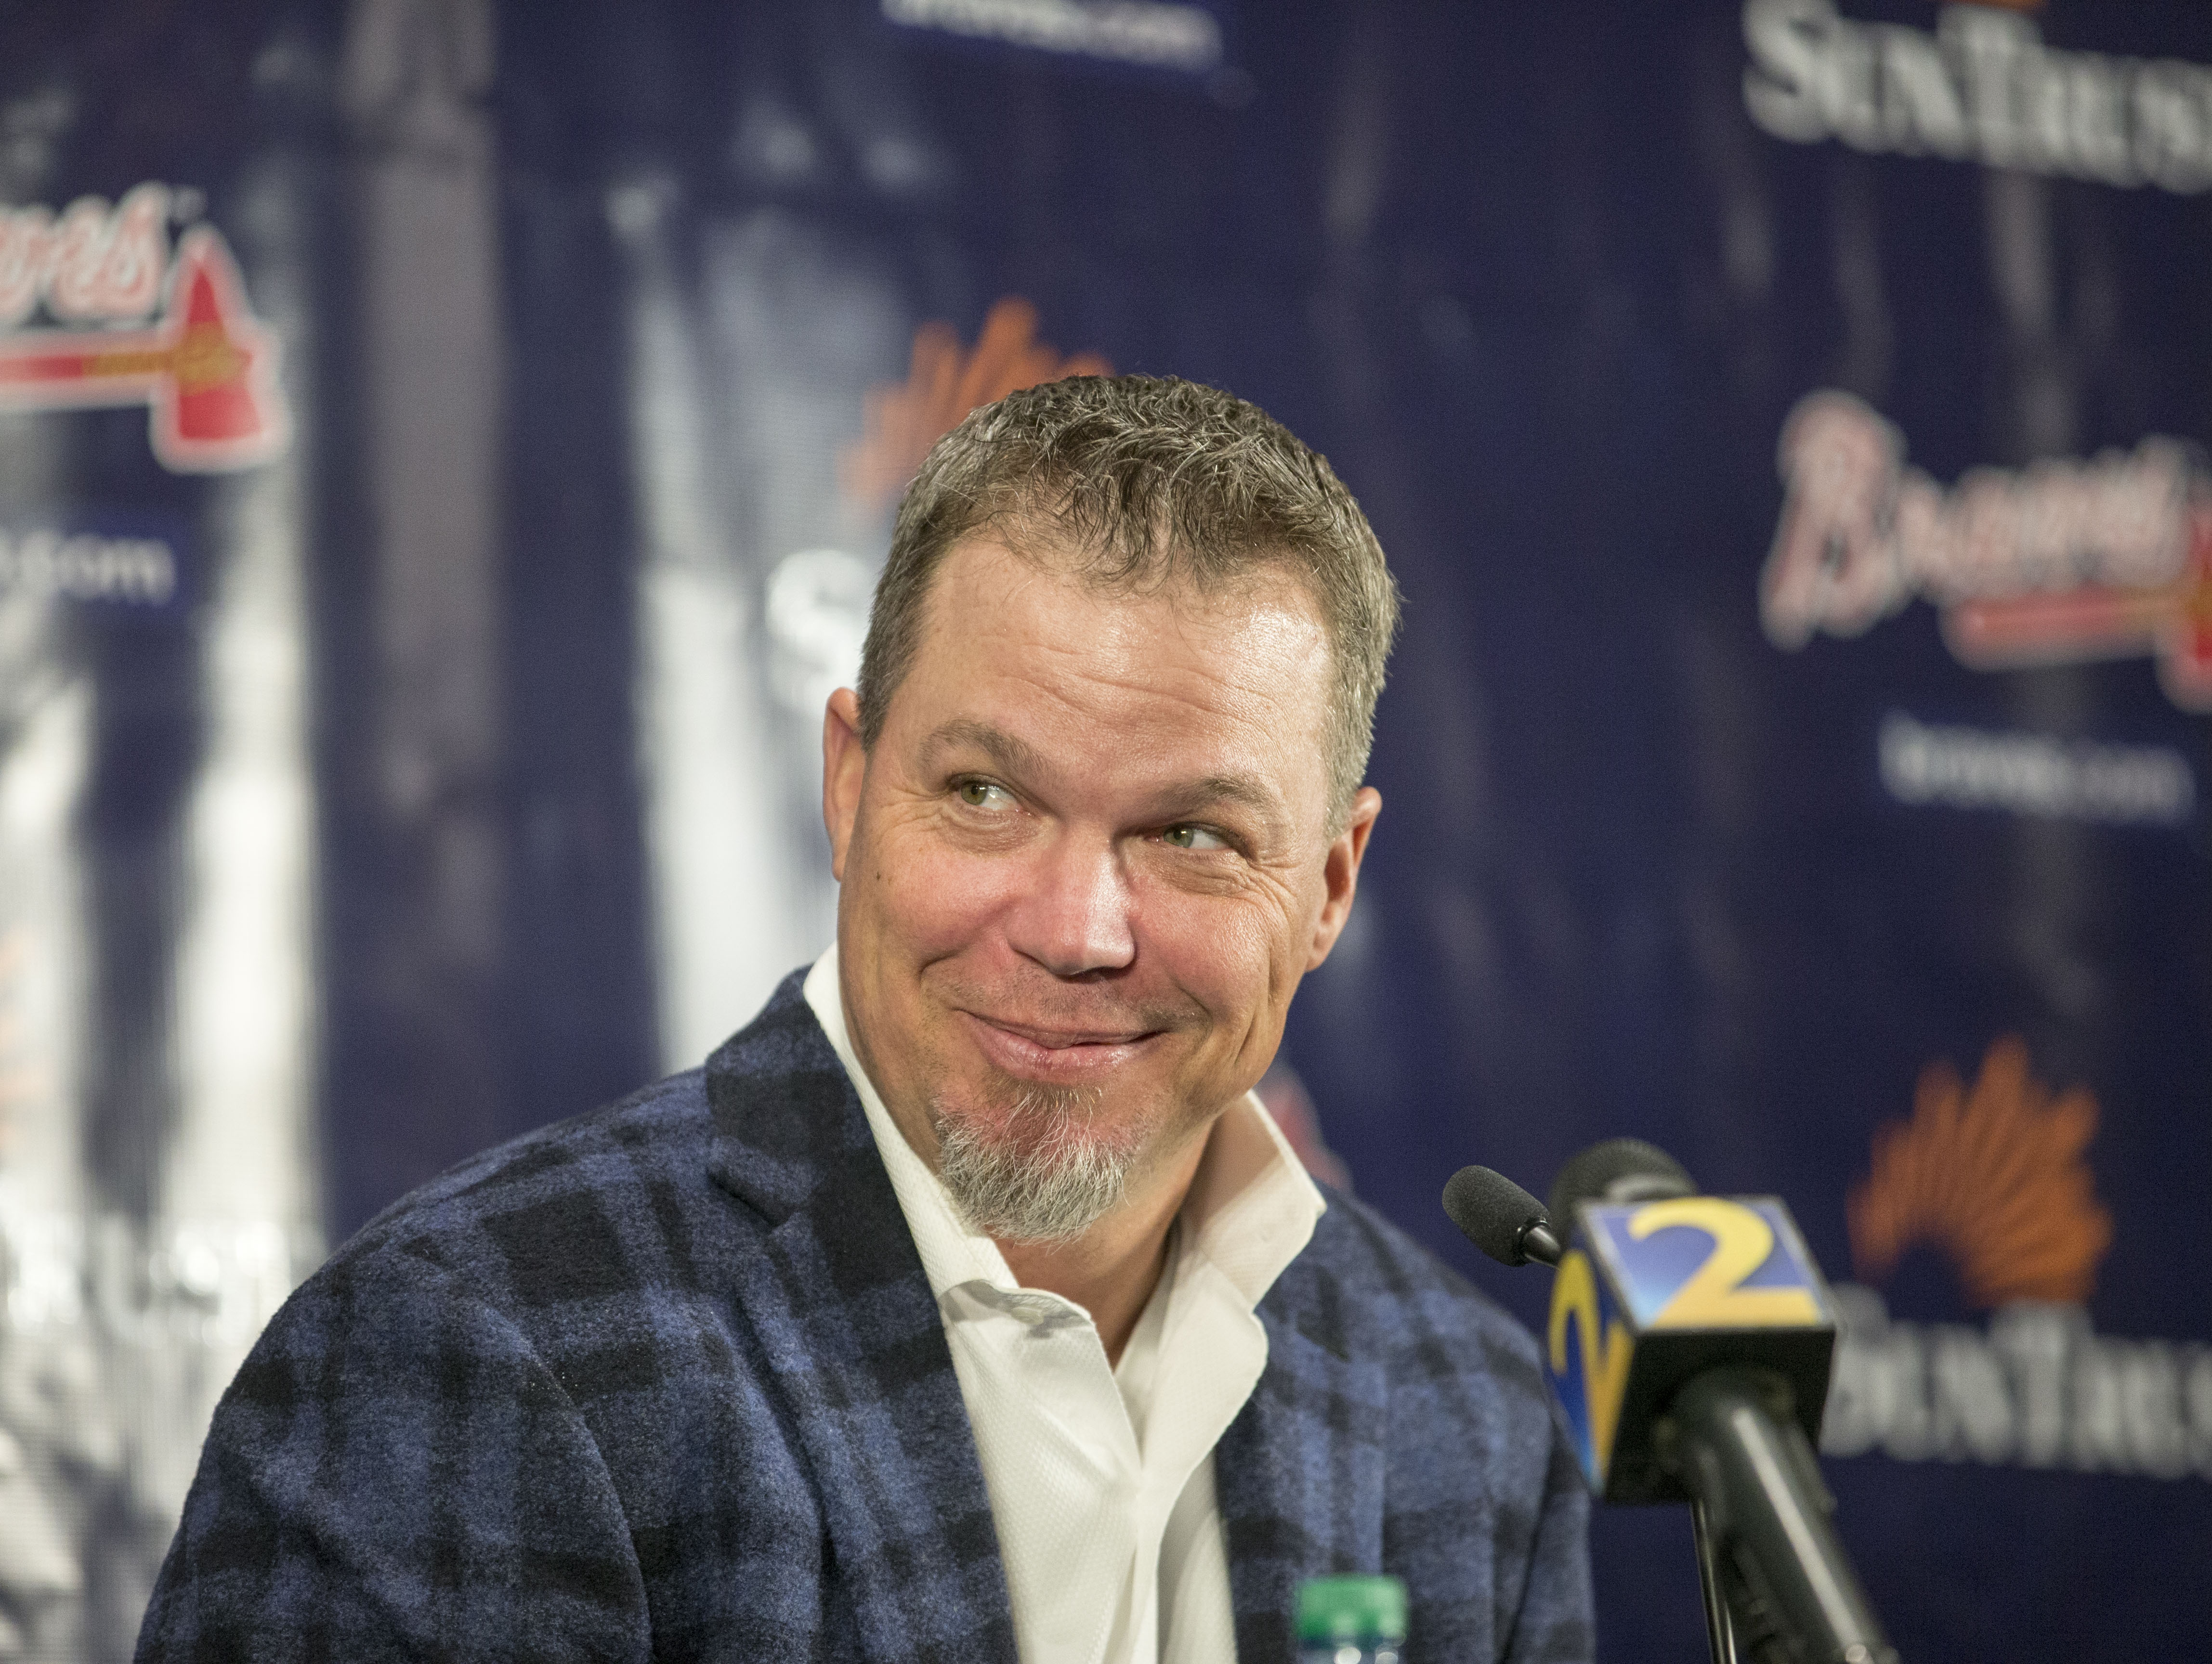 We all knew Chipper Jones would be a Hall of Famer. Now he is